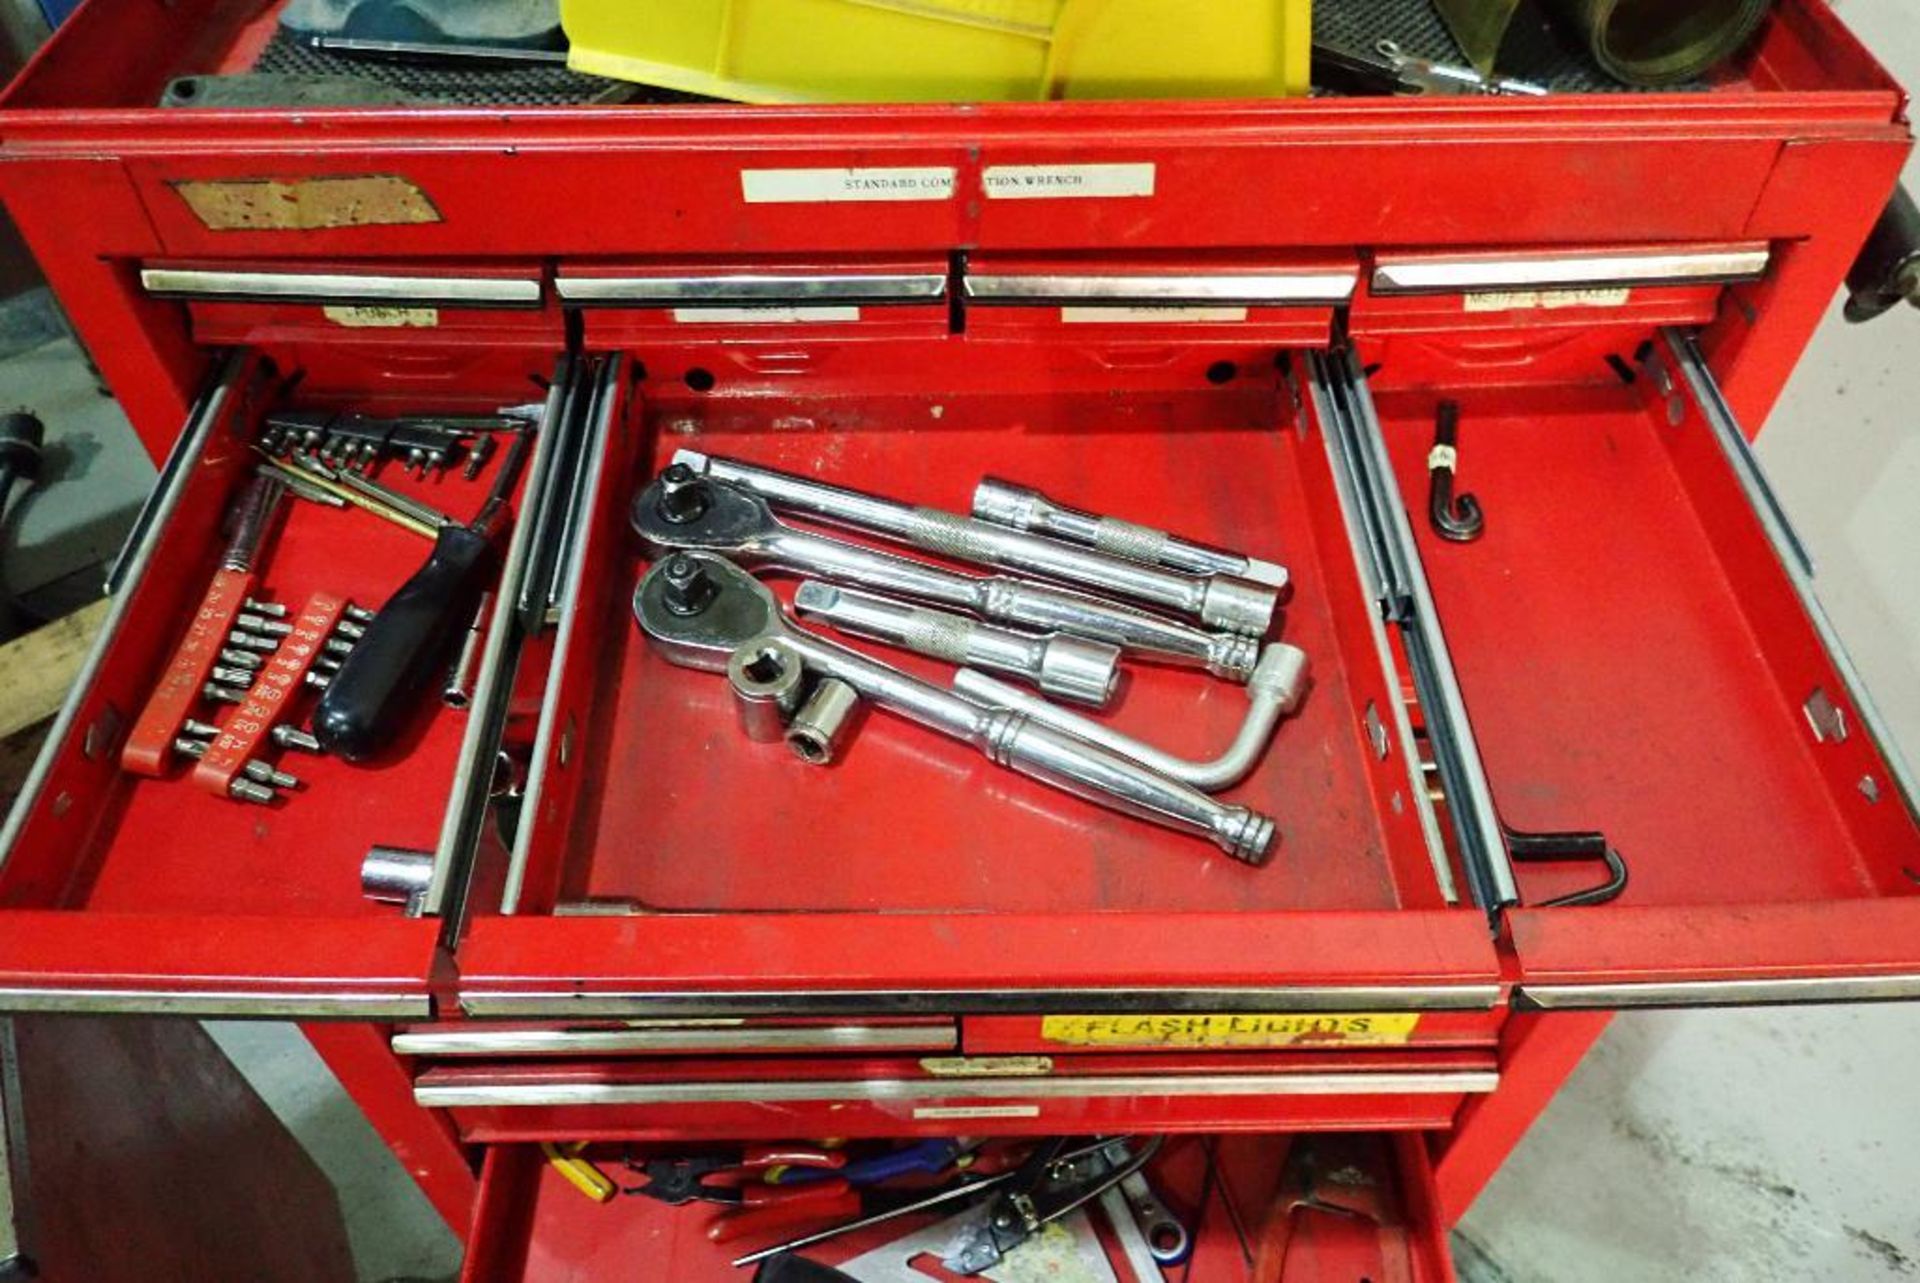 (2) tool chests with contents, wrenches, sockets, drill bits screw drivers, air tools, hammers, plie - Image 4 of 31